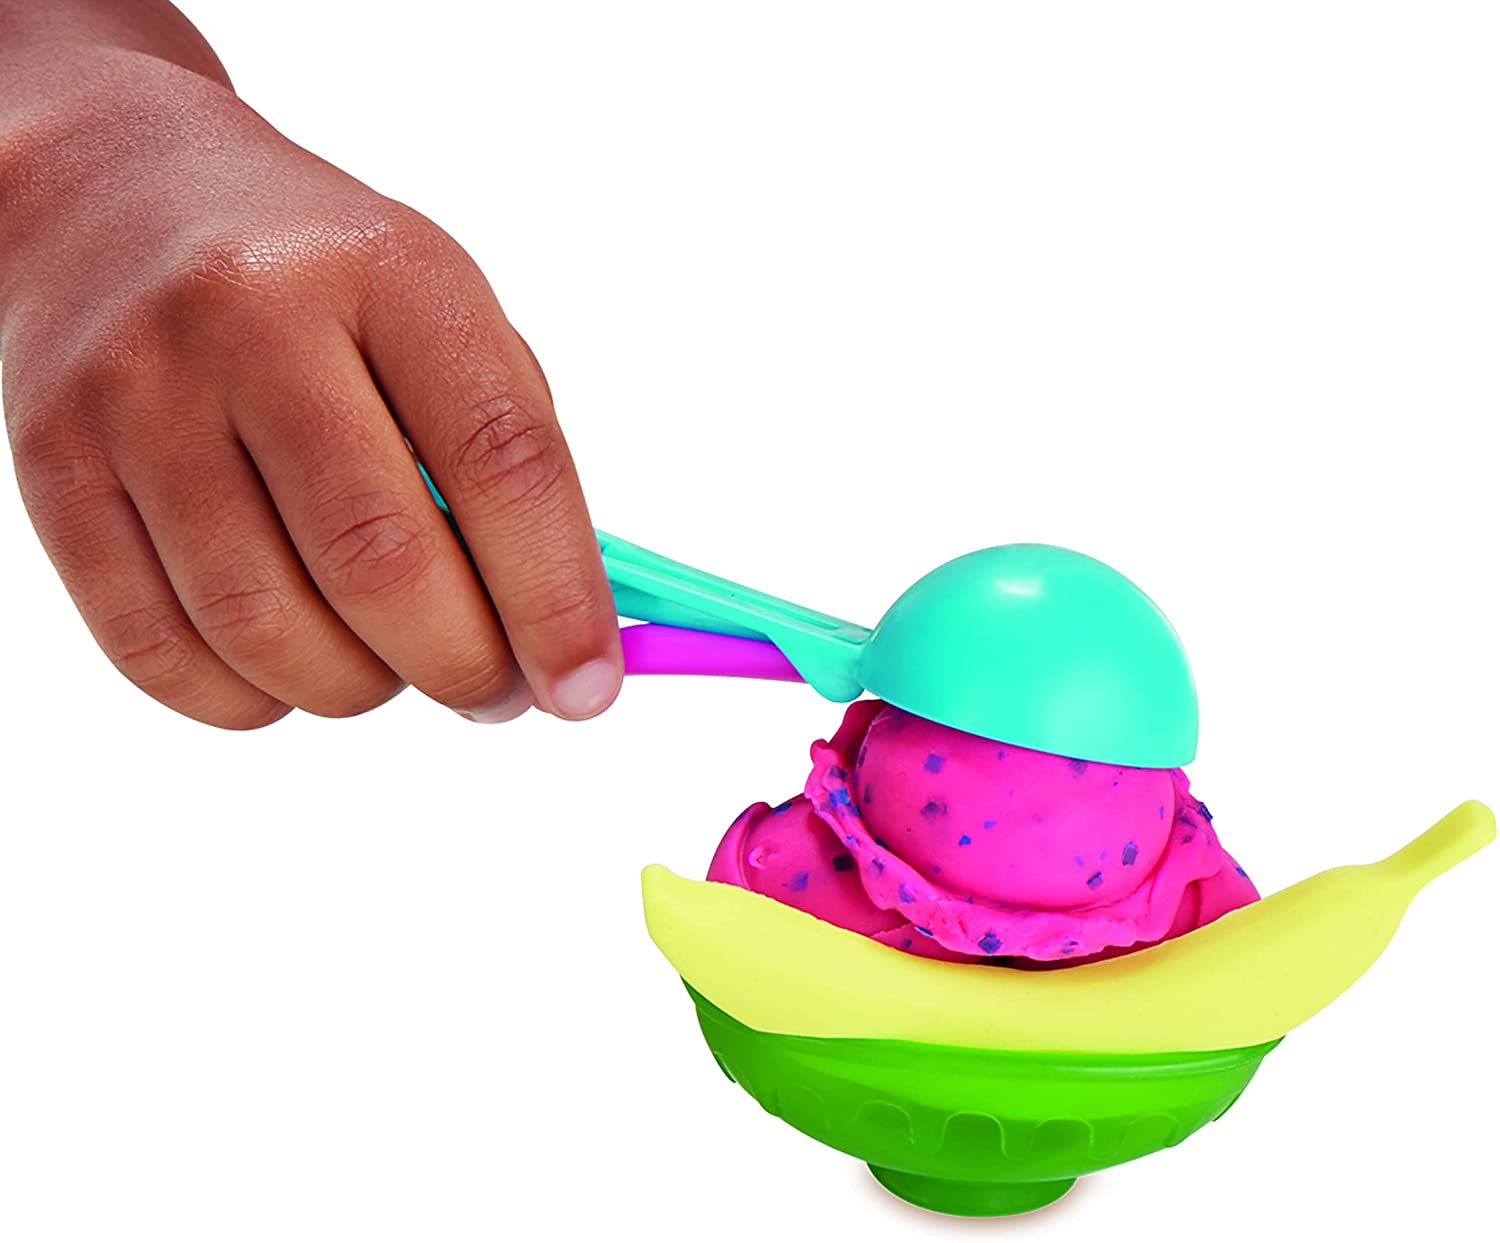 Play-Doh Kitchen Creations Ice Cream Party Play Food Set, 2 Oz Cans - with 6 Non-Toxic Colors